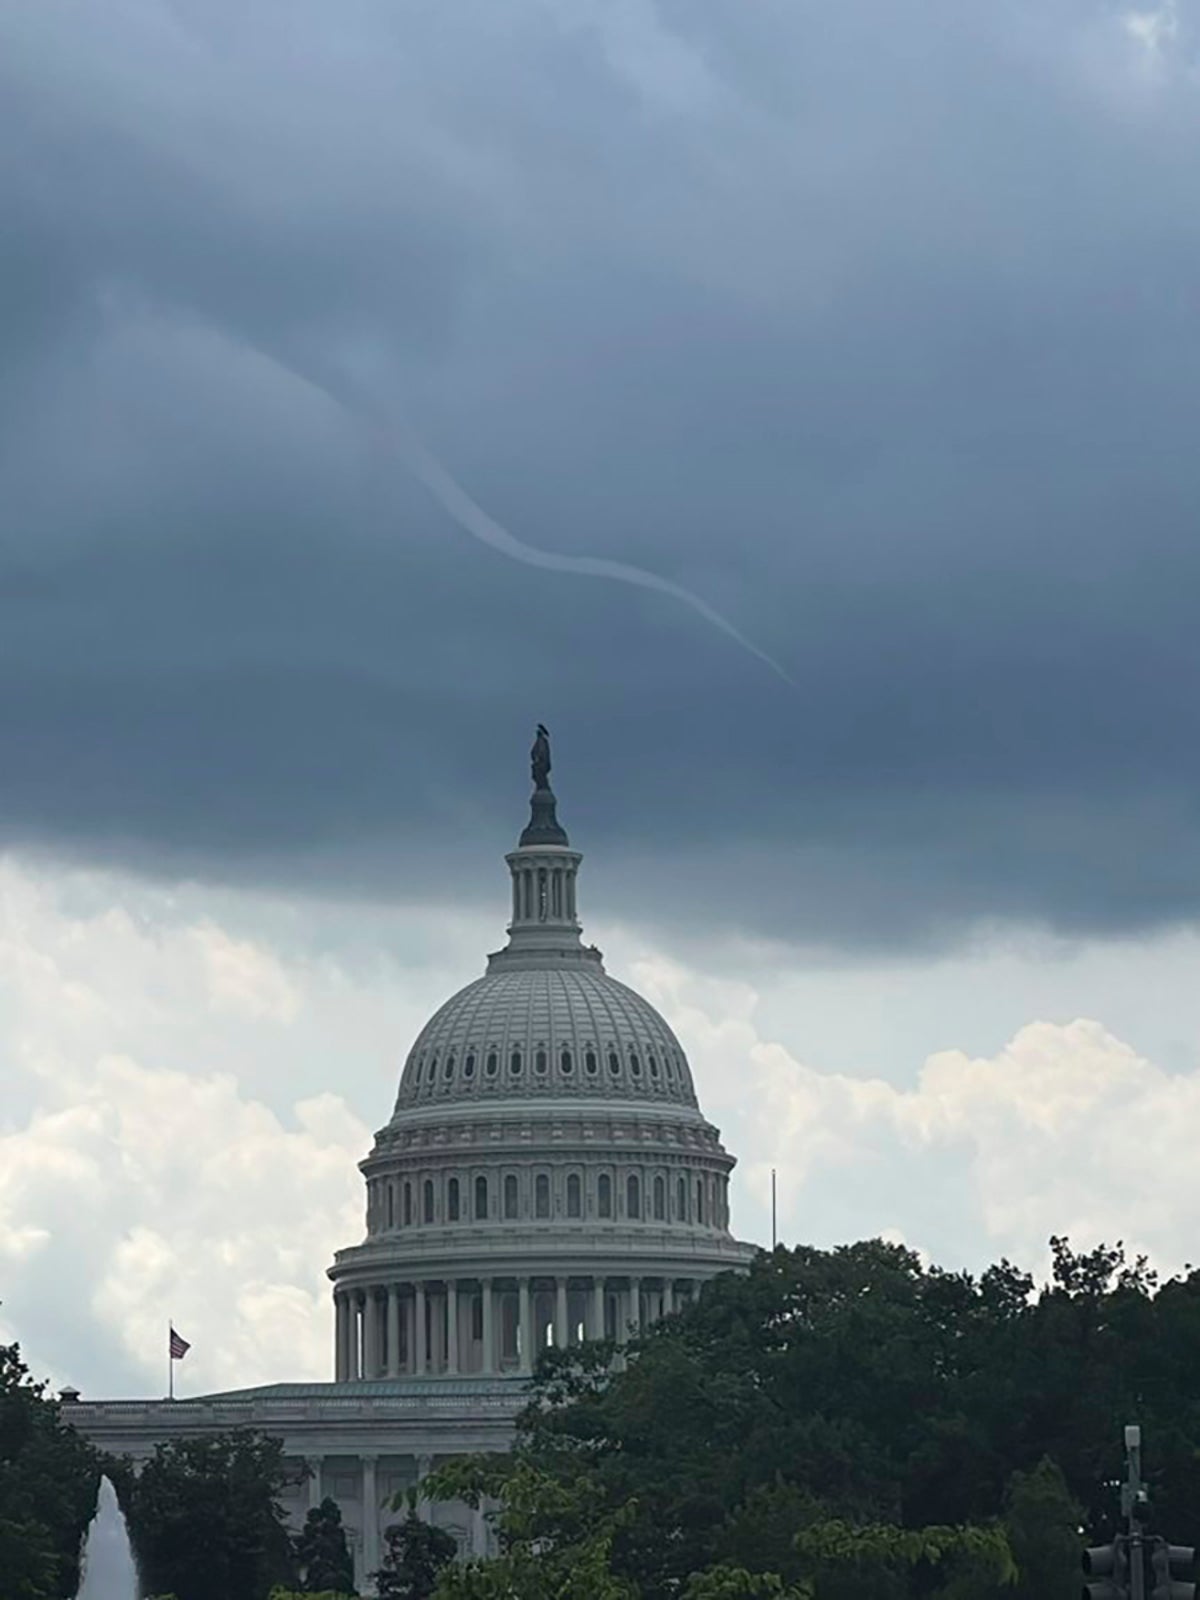 Unusual photo of funnel cloud over US Capitol goes viral